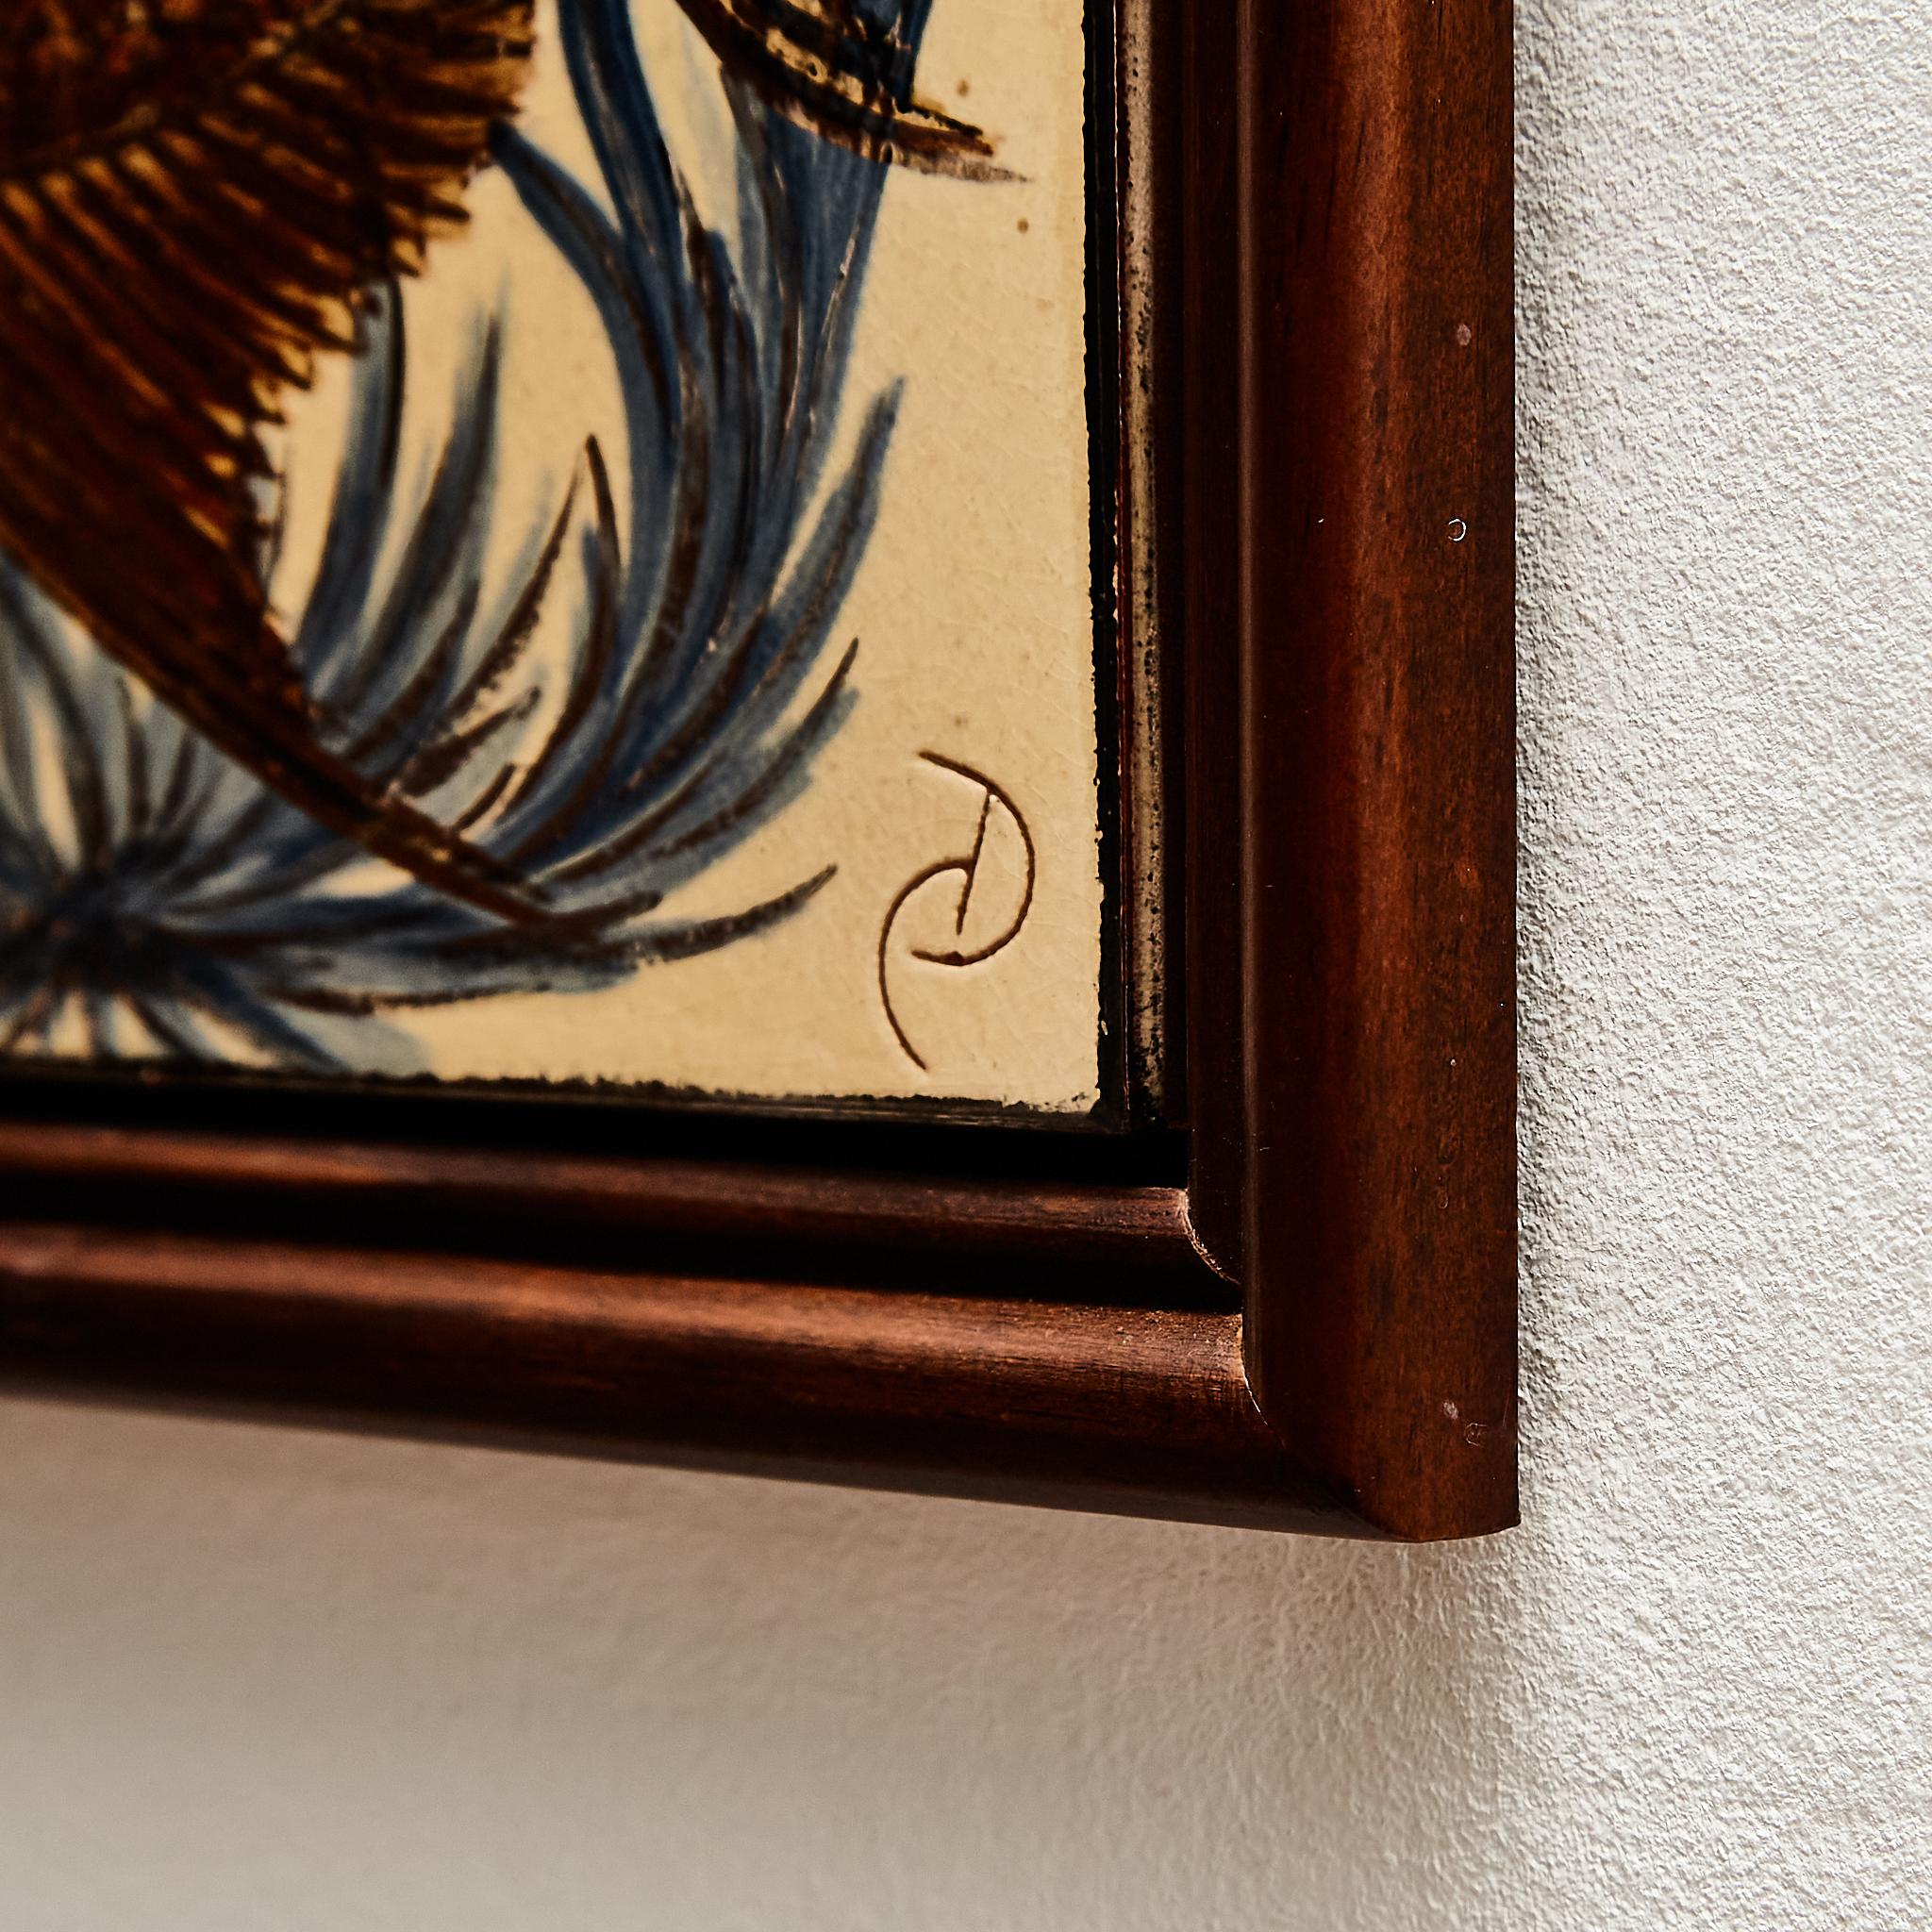 Ceramic hand painted artwork of a fish design by Catalan artist Diaz Costa, circa 1960.
Framed. Signed.

In original condition, with minor wear consistent of age and use, preserving a beautiul patina.